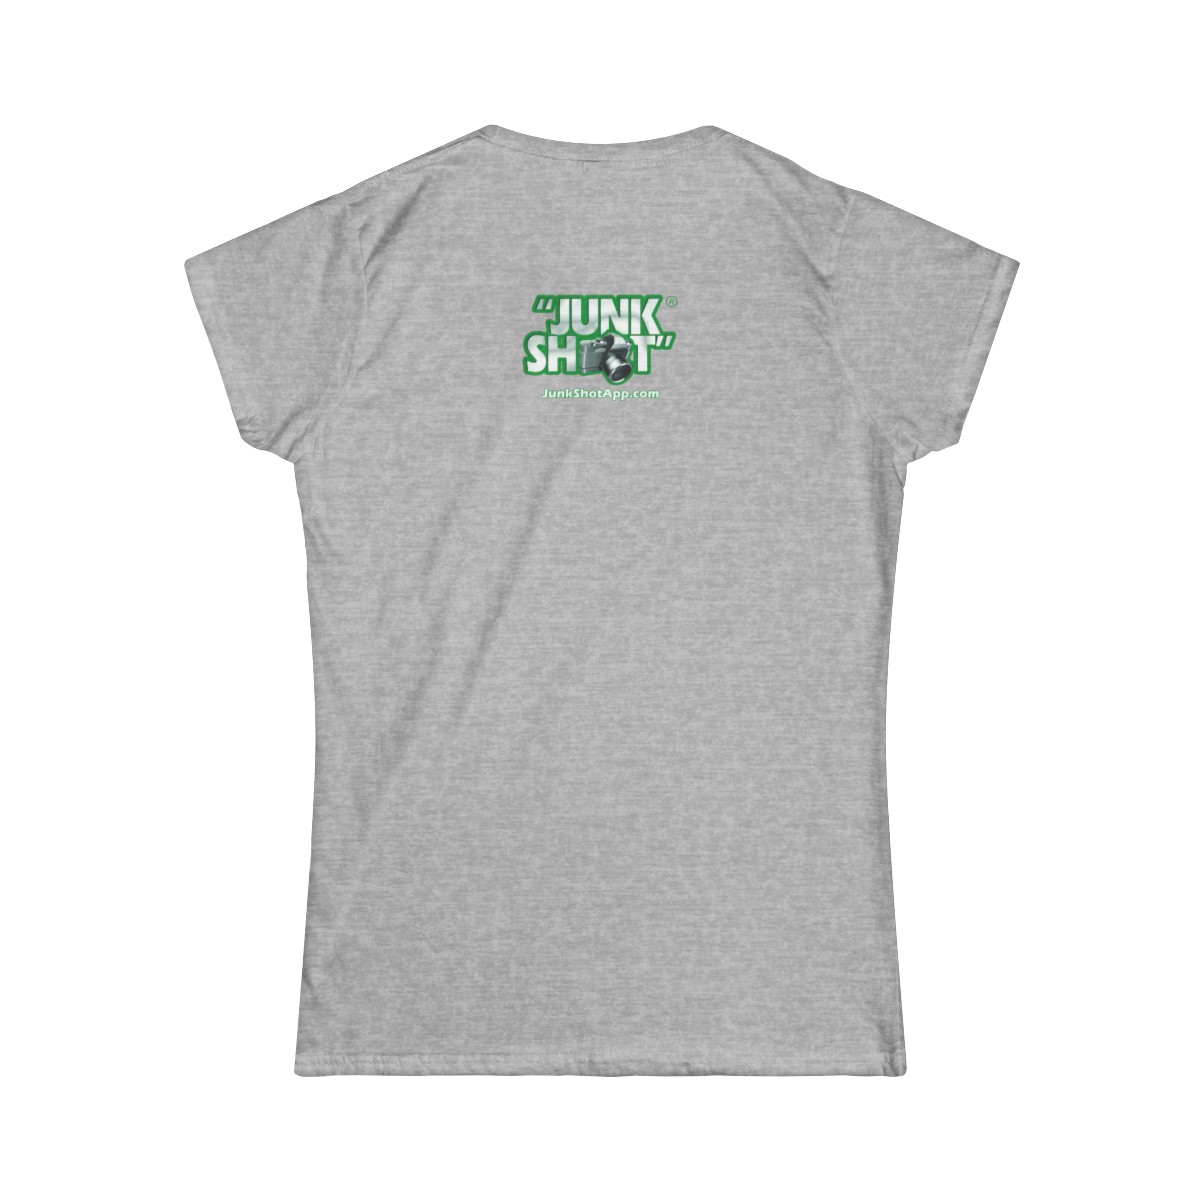 "THE ORIGIN STORY" Women's Softstyle Tee product thumbnail image